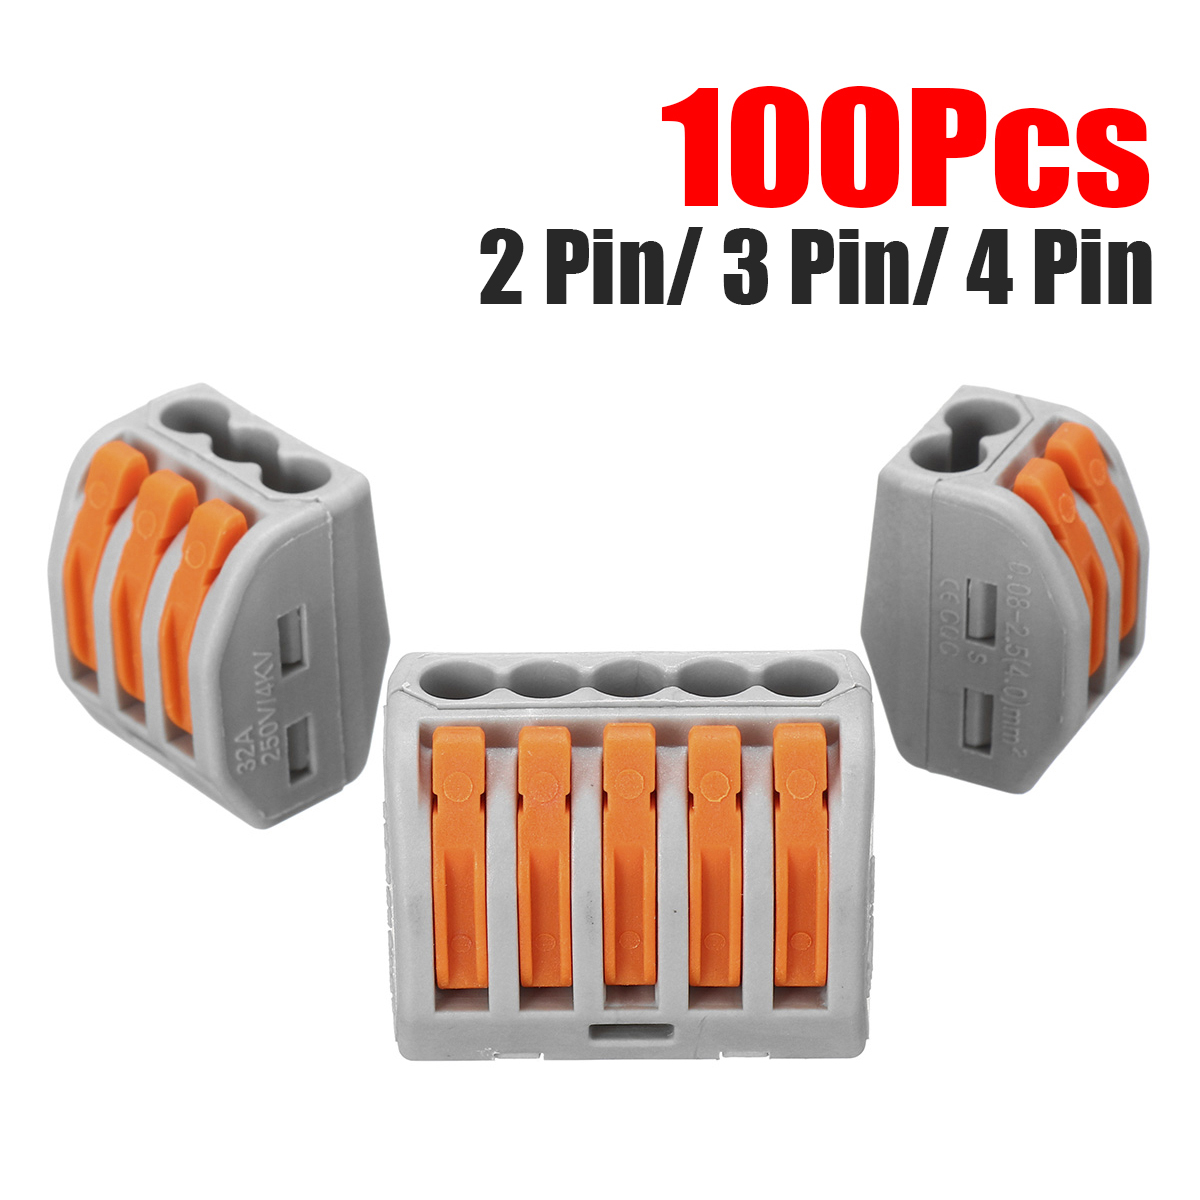 100PcsSet-Terminal-Block-Reusable-Electric-Cable-Wire-Connector-235-Pin-1487164-2